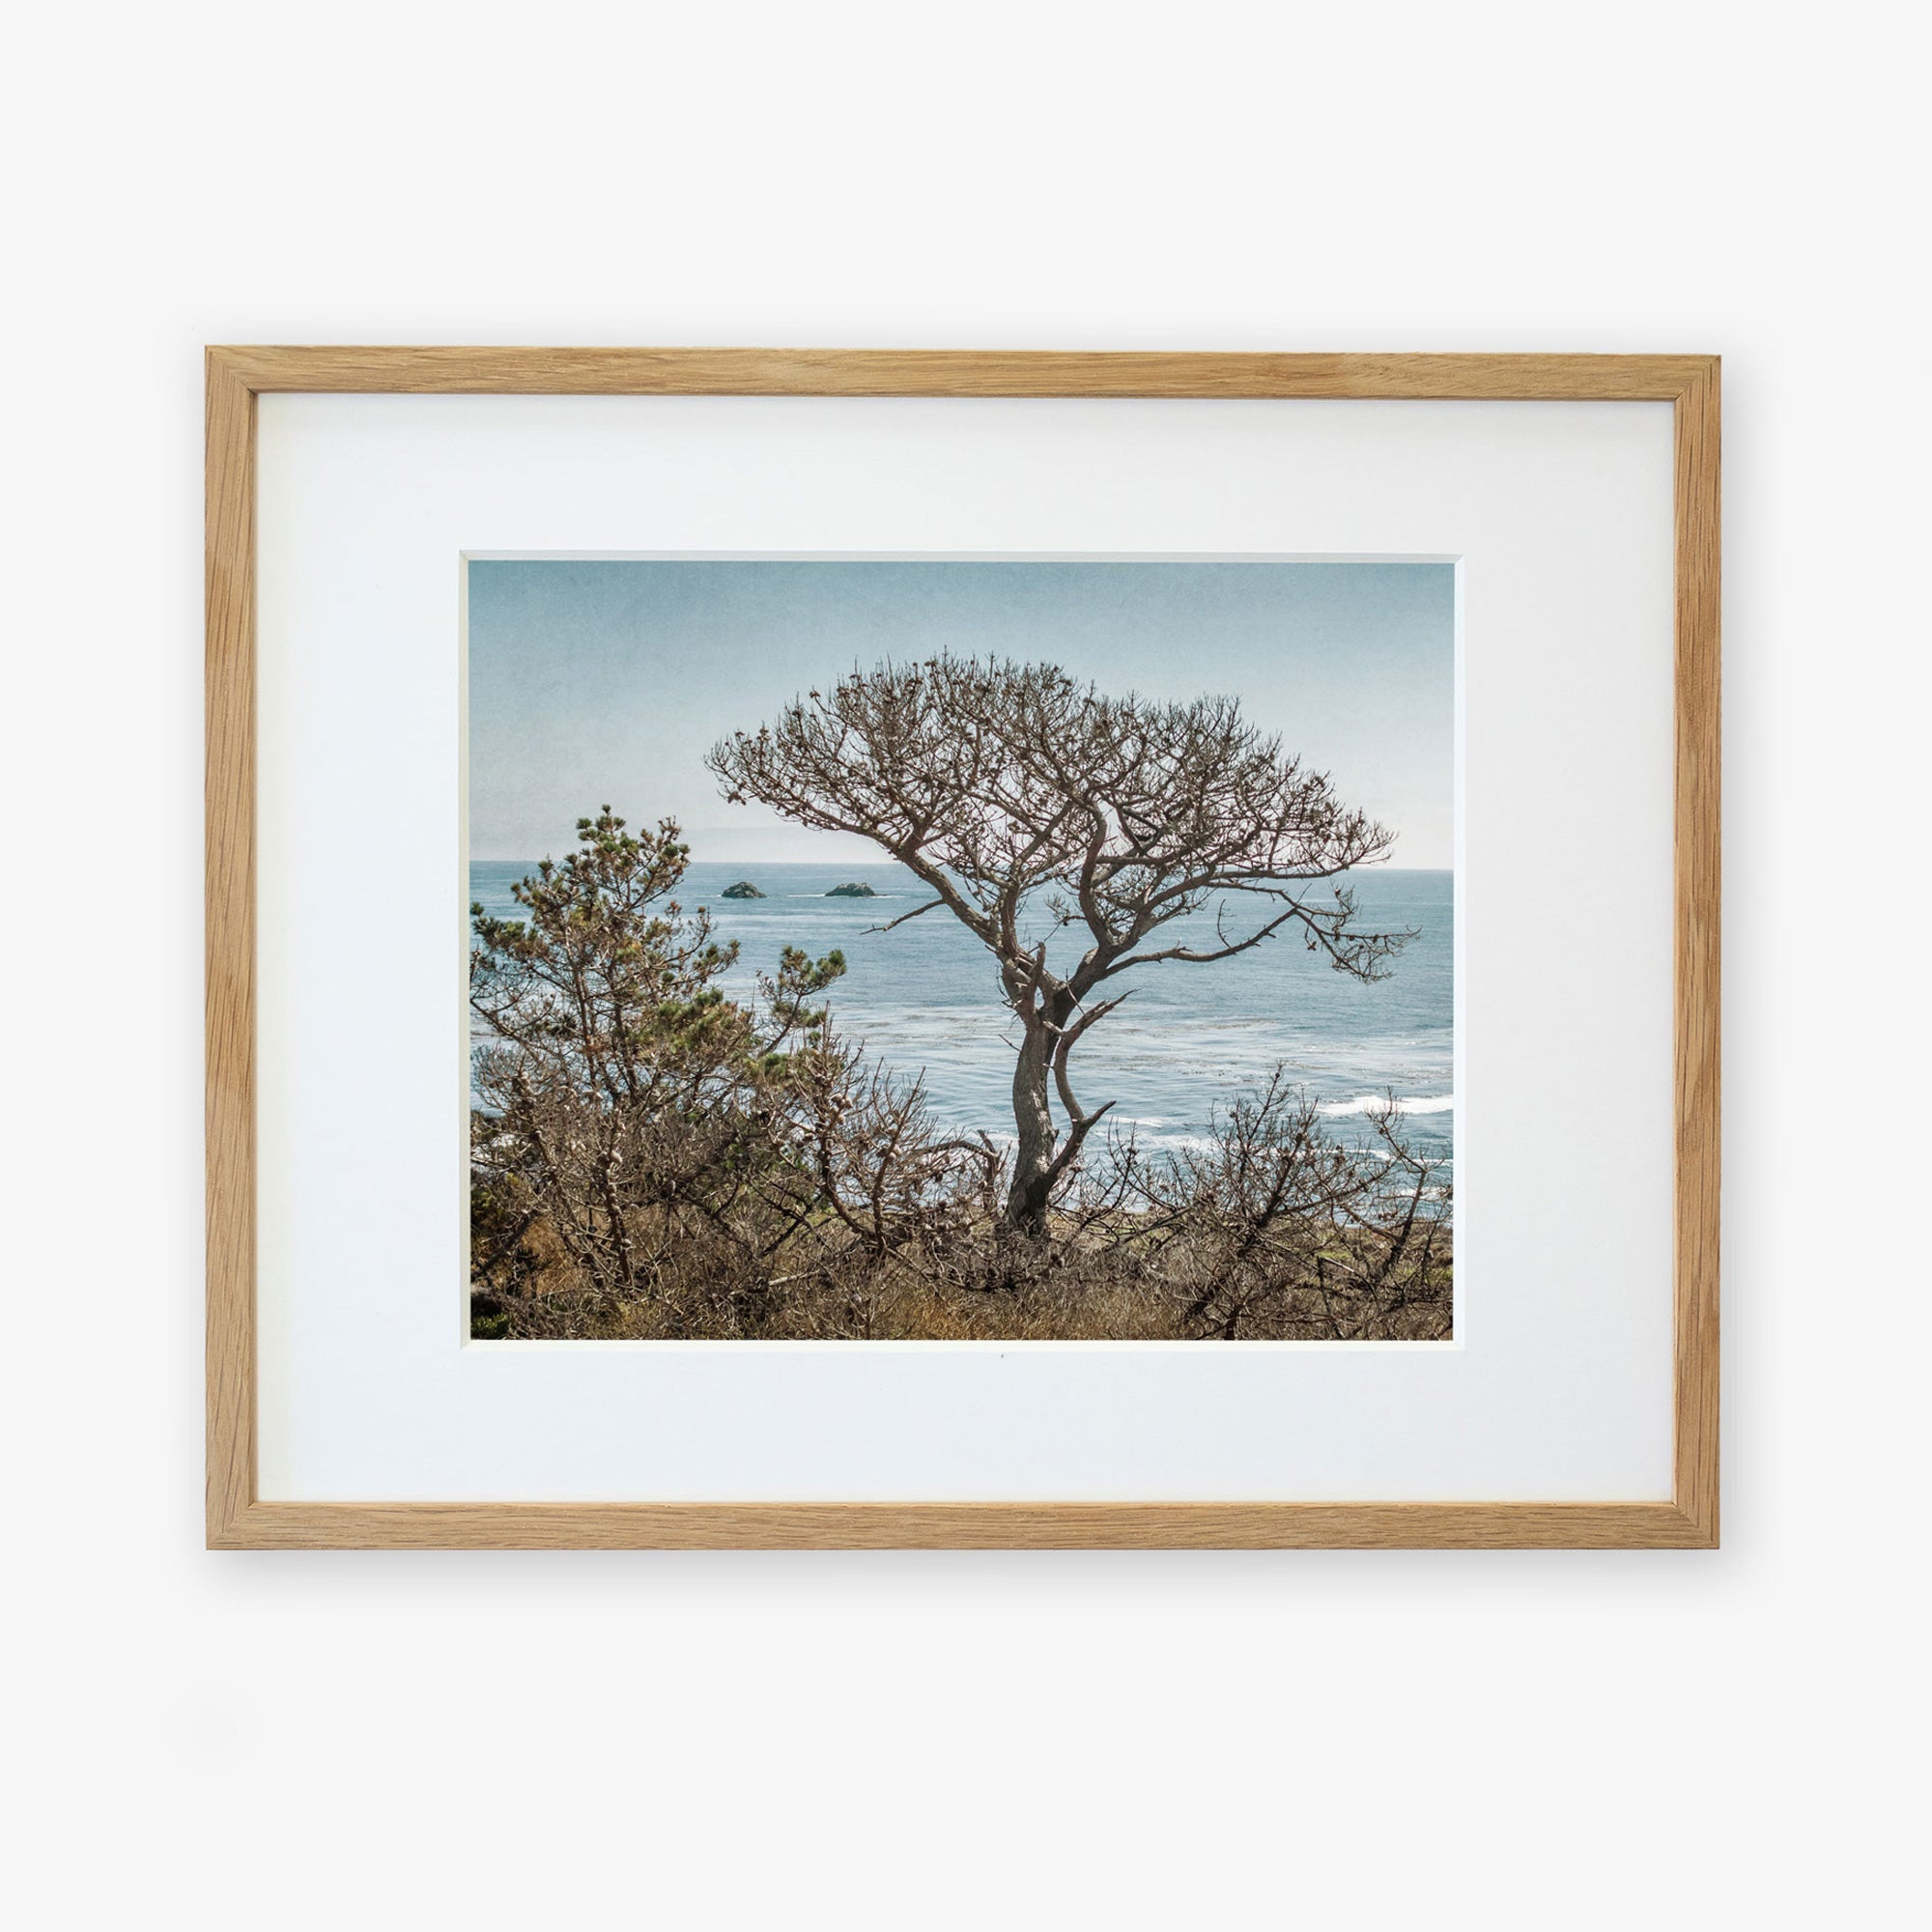 An unframed photograph of a solitary tree with a sprawling canopy, overlooking a serene ocean with distant islands, printed on archival photographic paper against a white background from Offley Green's California Landscape Art in Big Sur, 'Wind Blown Tree'.